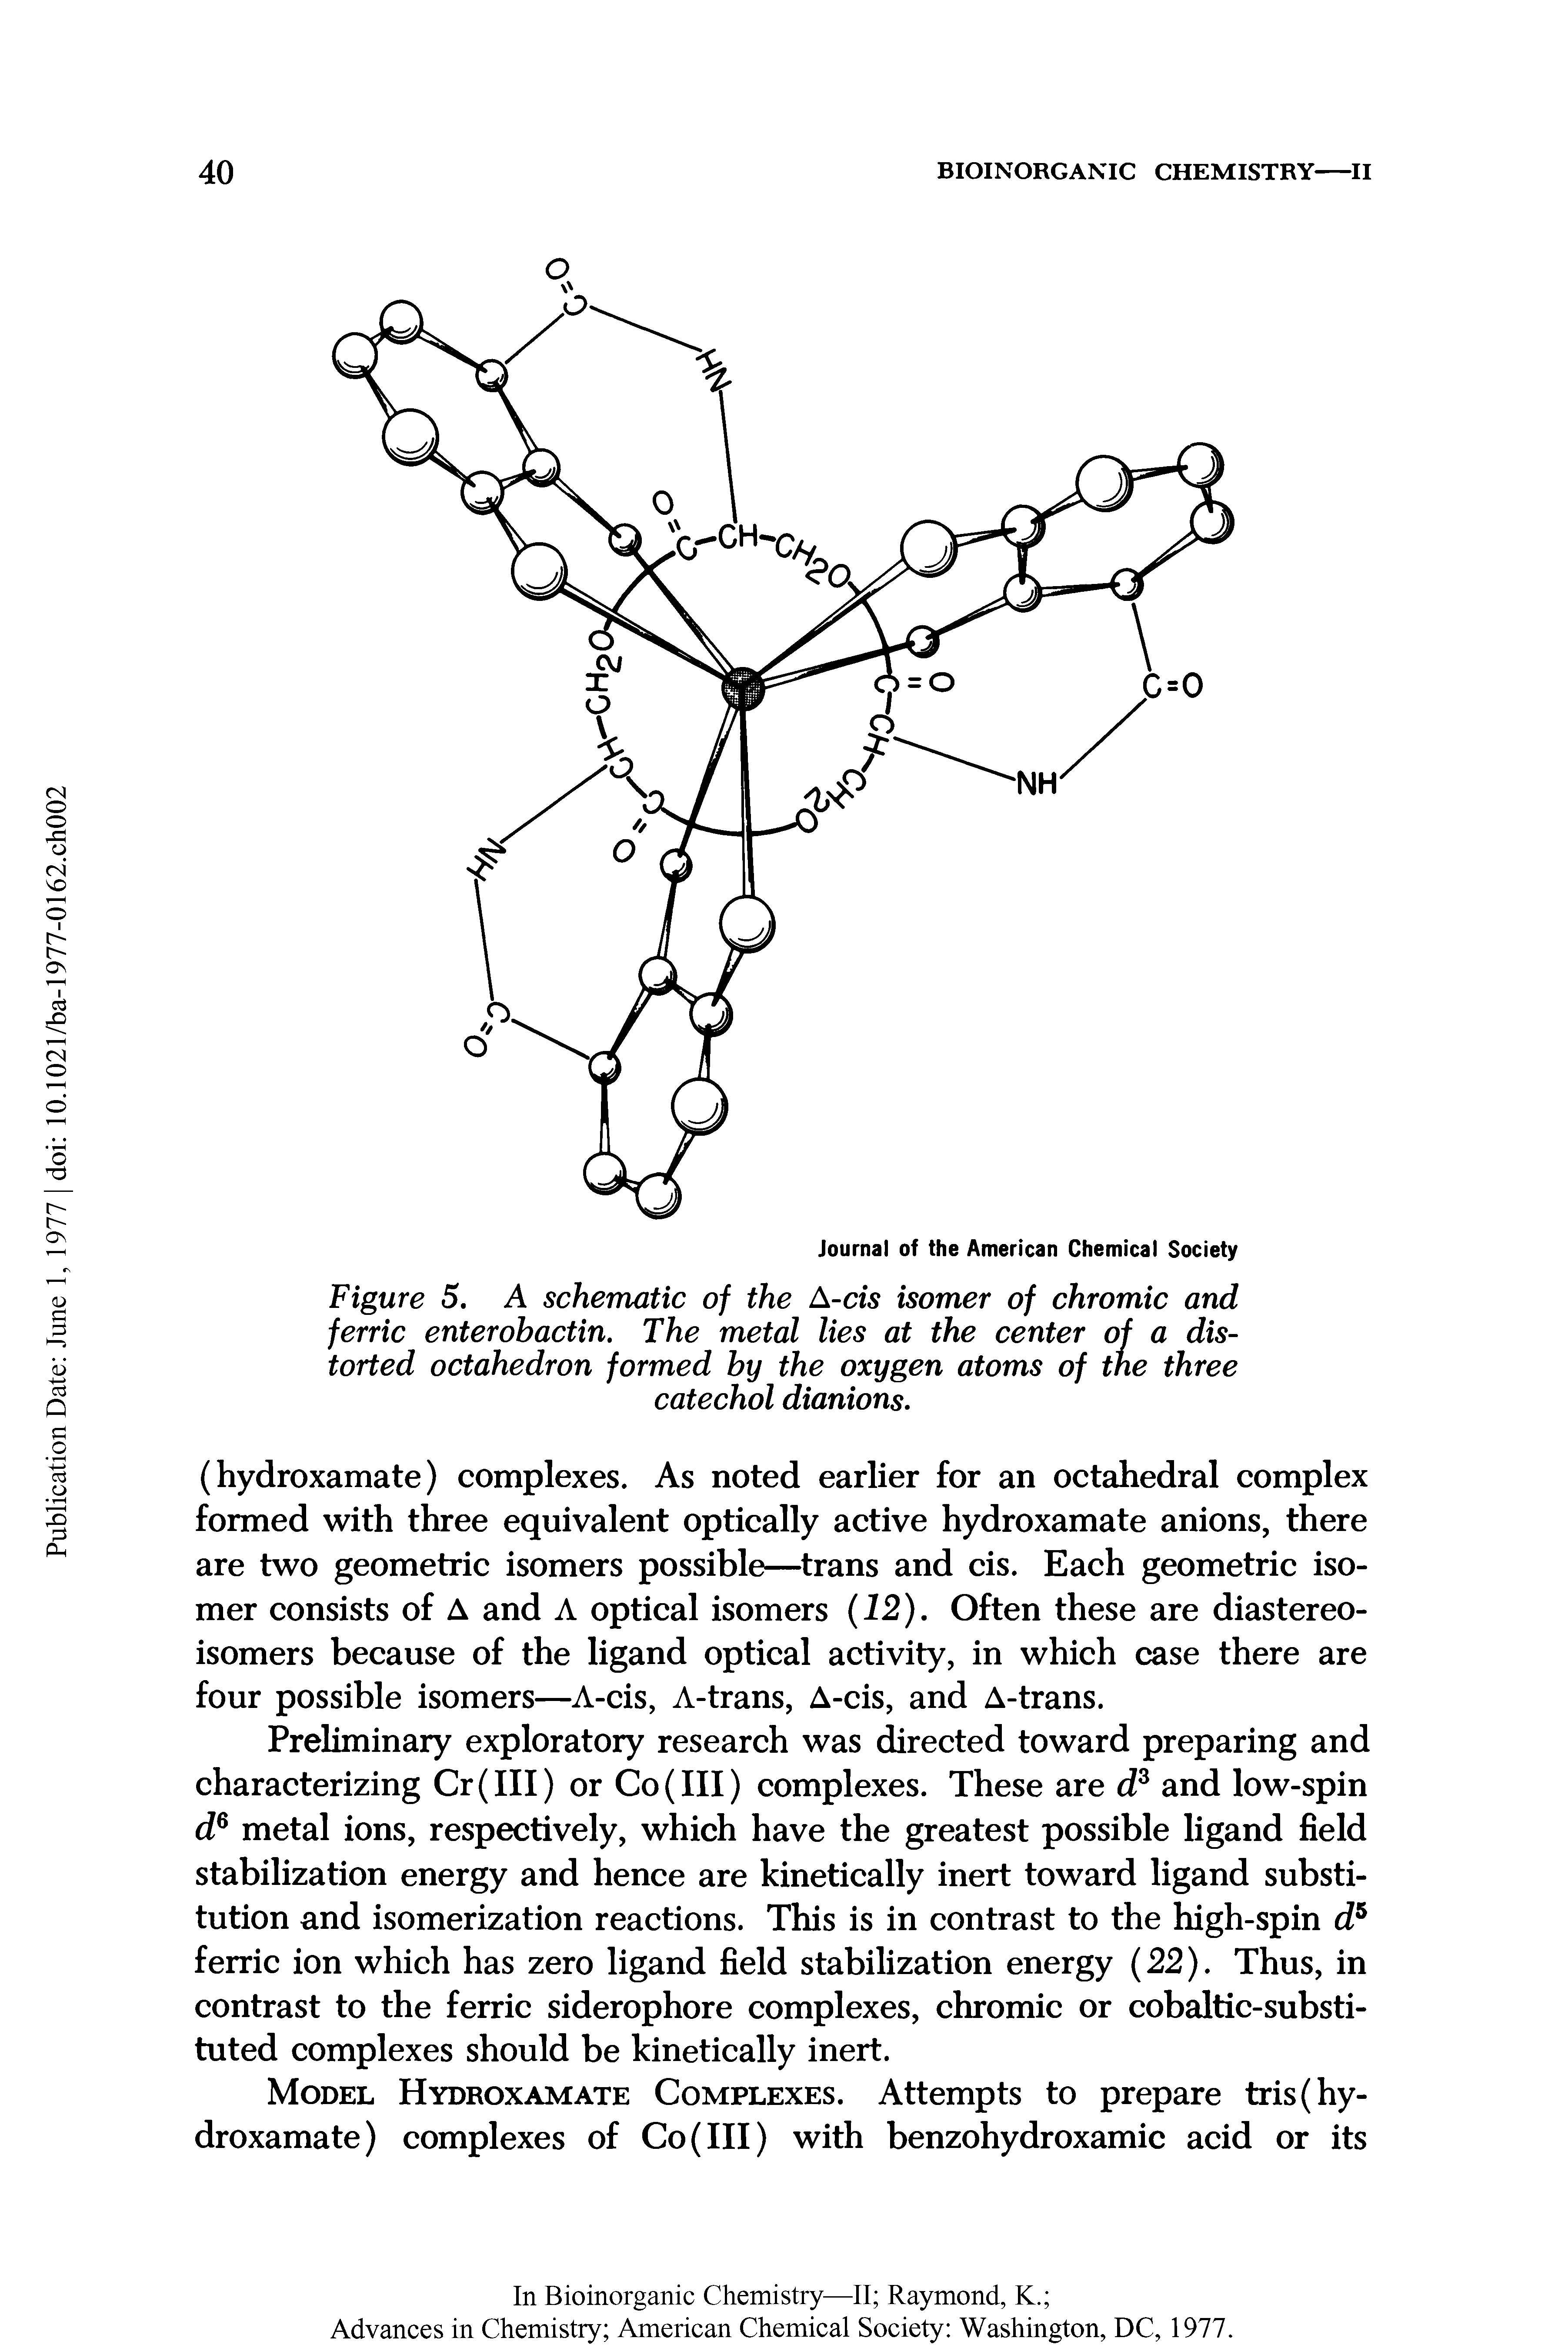 Figure 5. A schematic of the A-cis isomer of chromic and ferric enterobactin. The metal lies at the center of a distorted octahedron formed by the oxygen atoms of tne three catechol dianions.